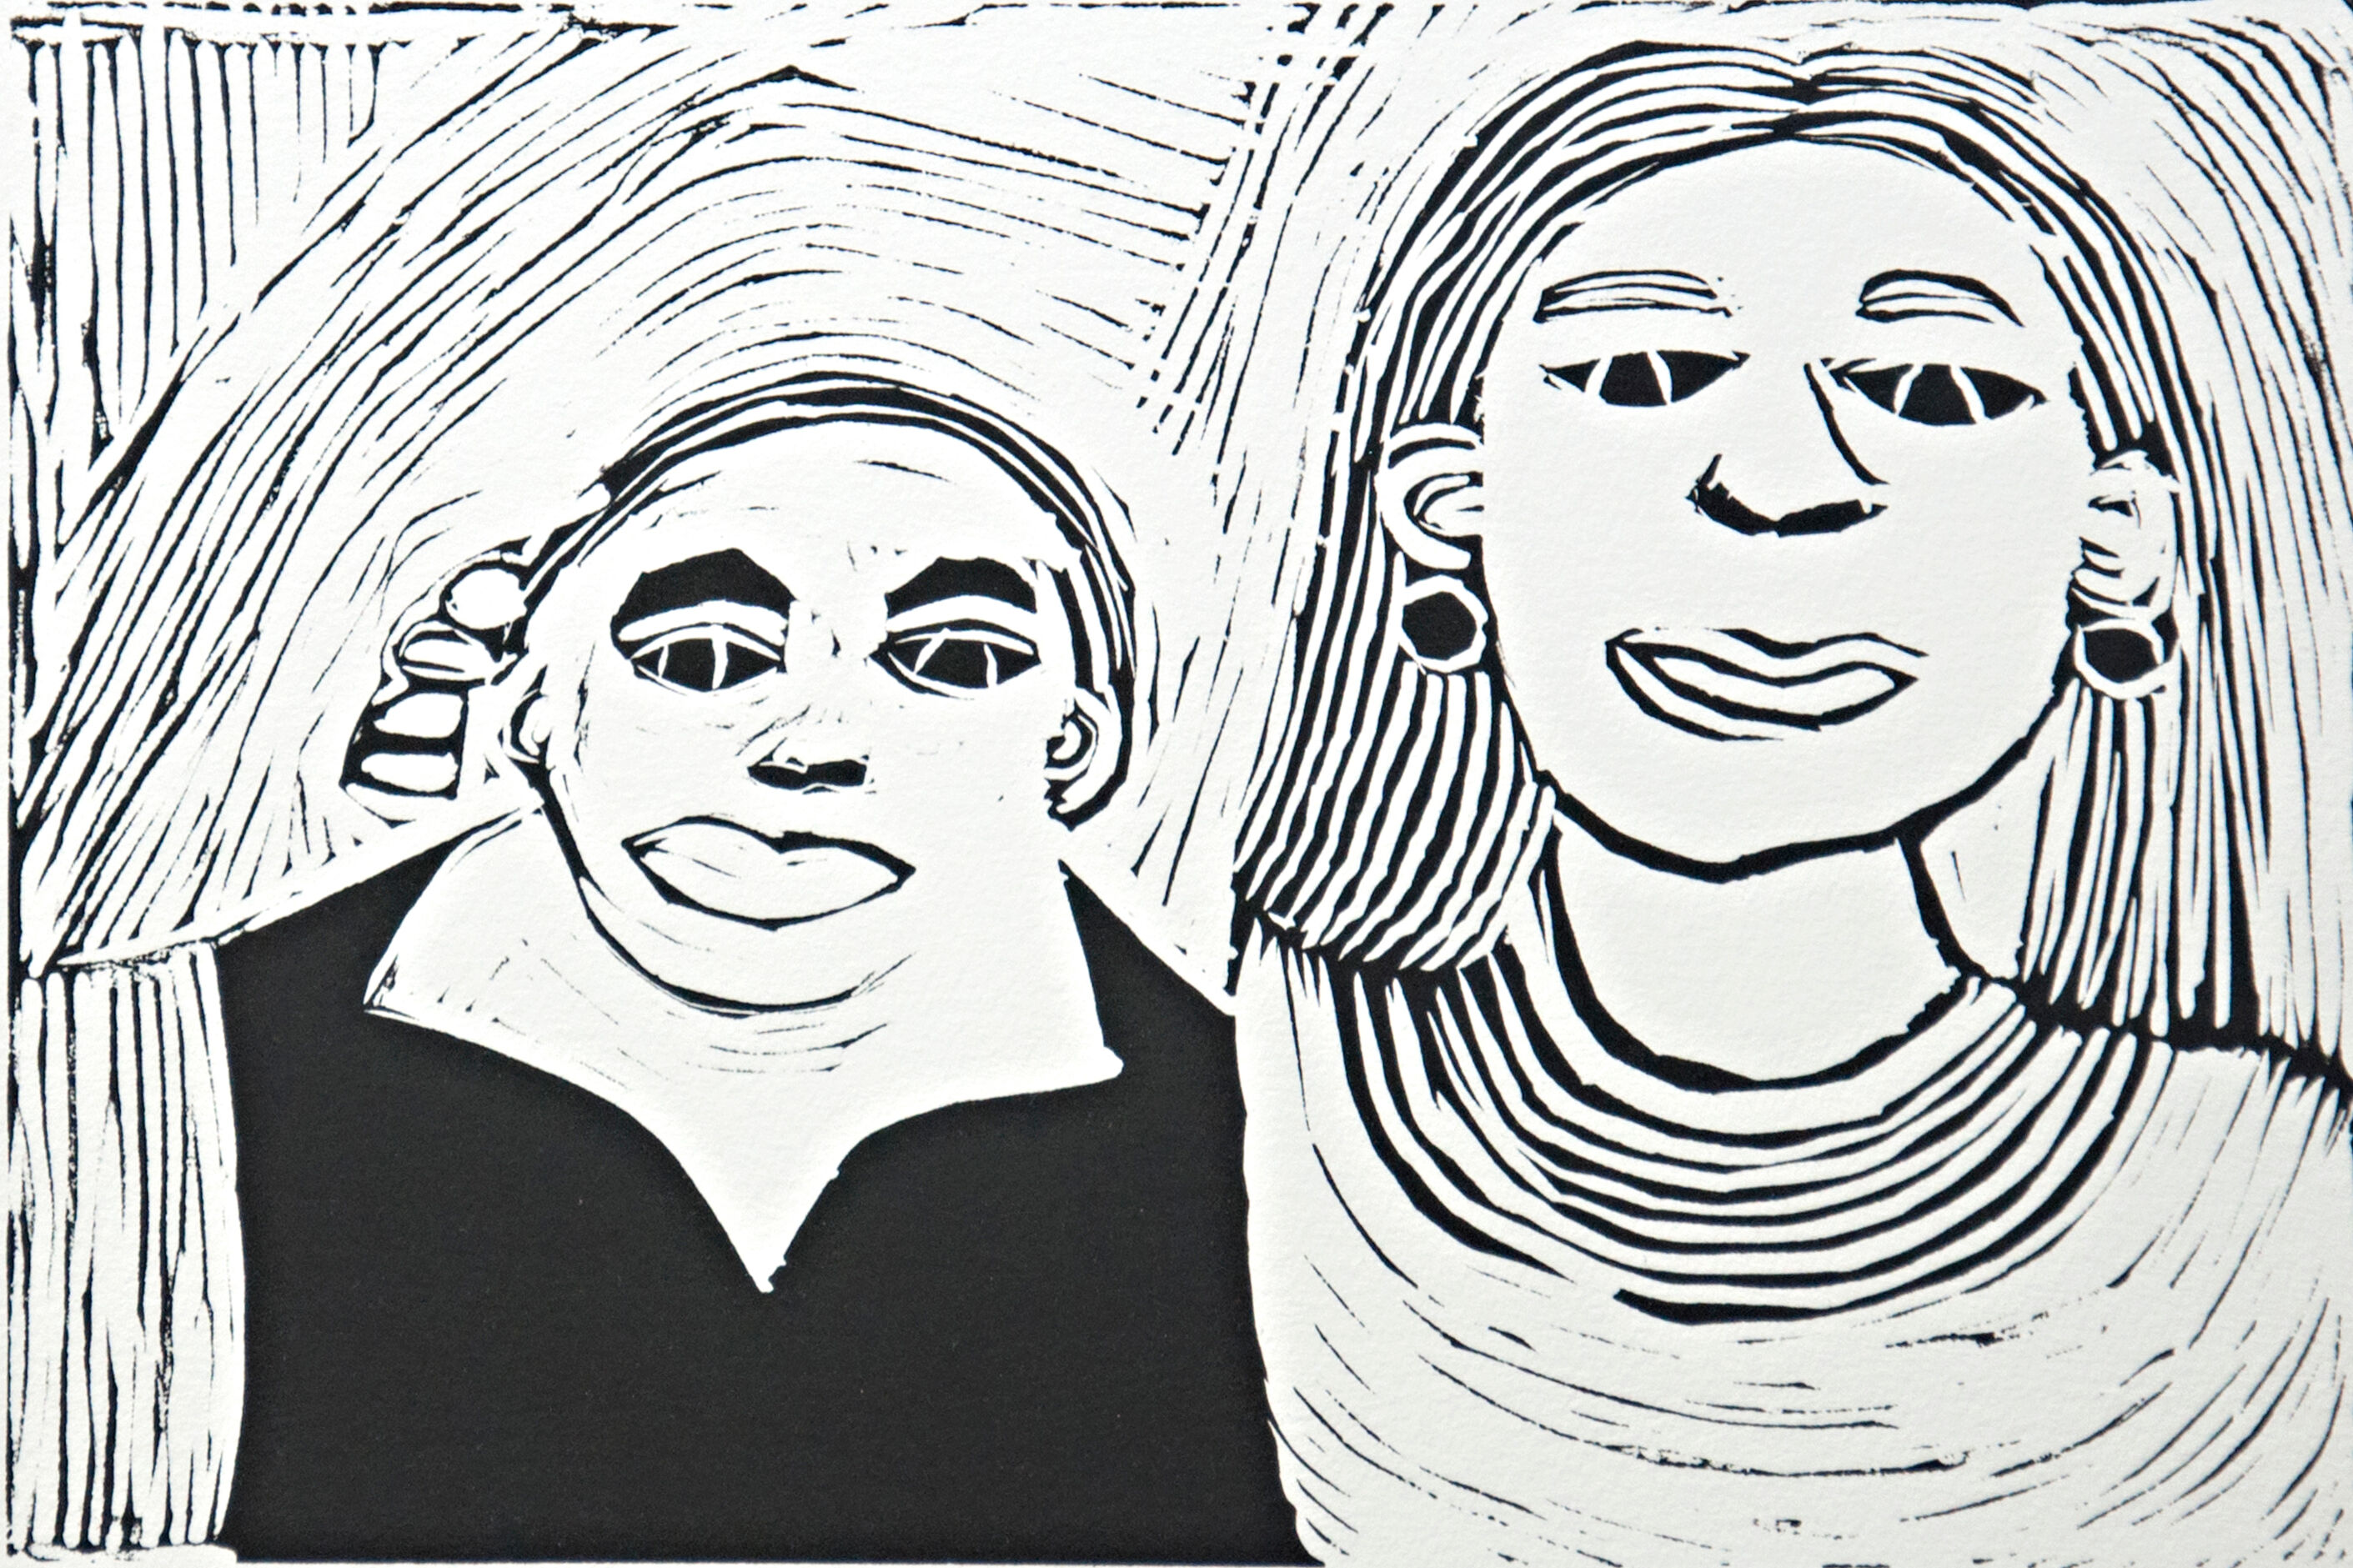 Fiona Taylor, Fiona and Nicole Livingstone, 2017, linocut, edition of 3, 20.5 x 30cm
Courtesy the artist and Arts Project Australia, Melbourne
